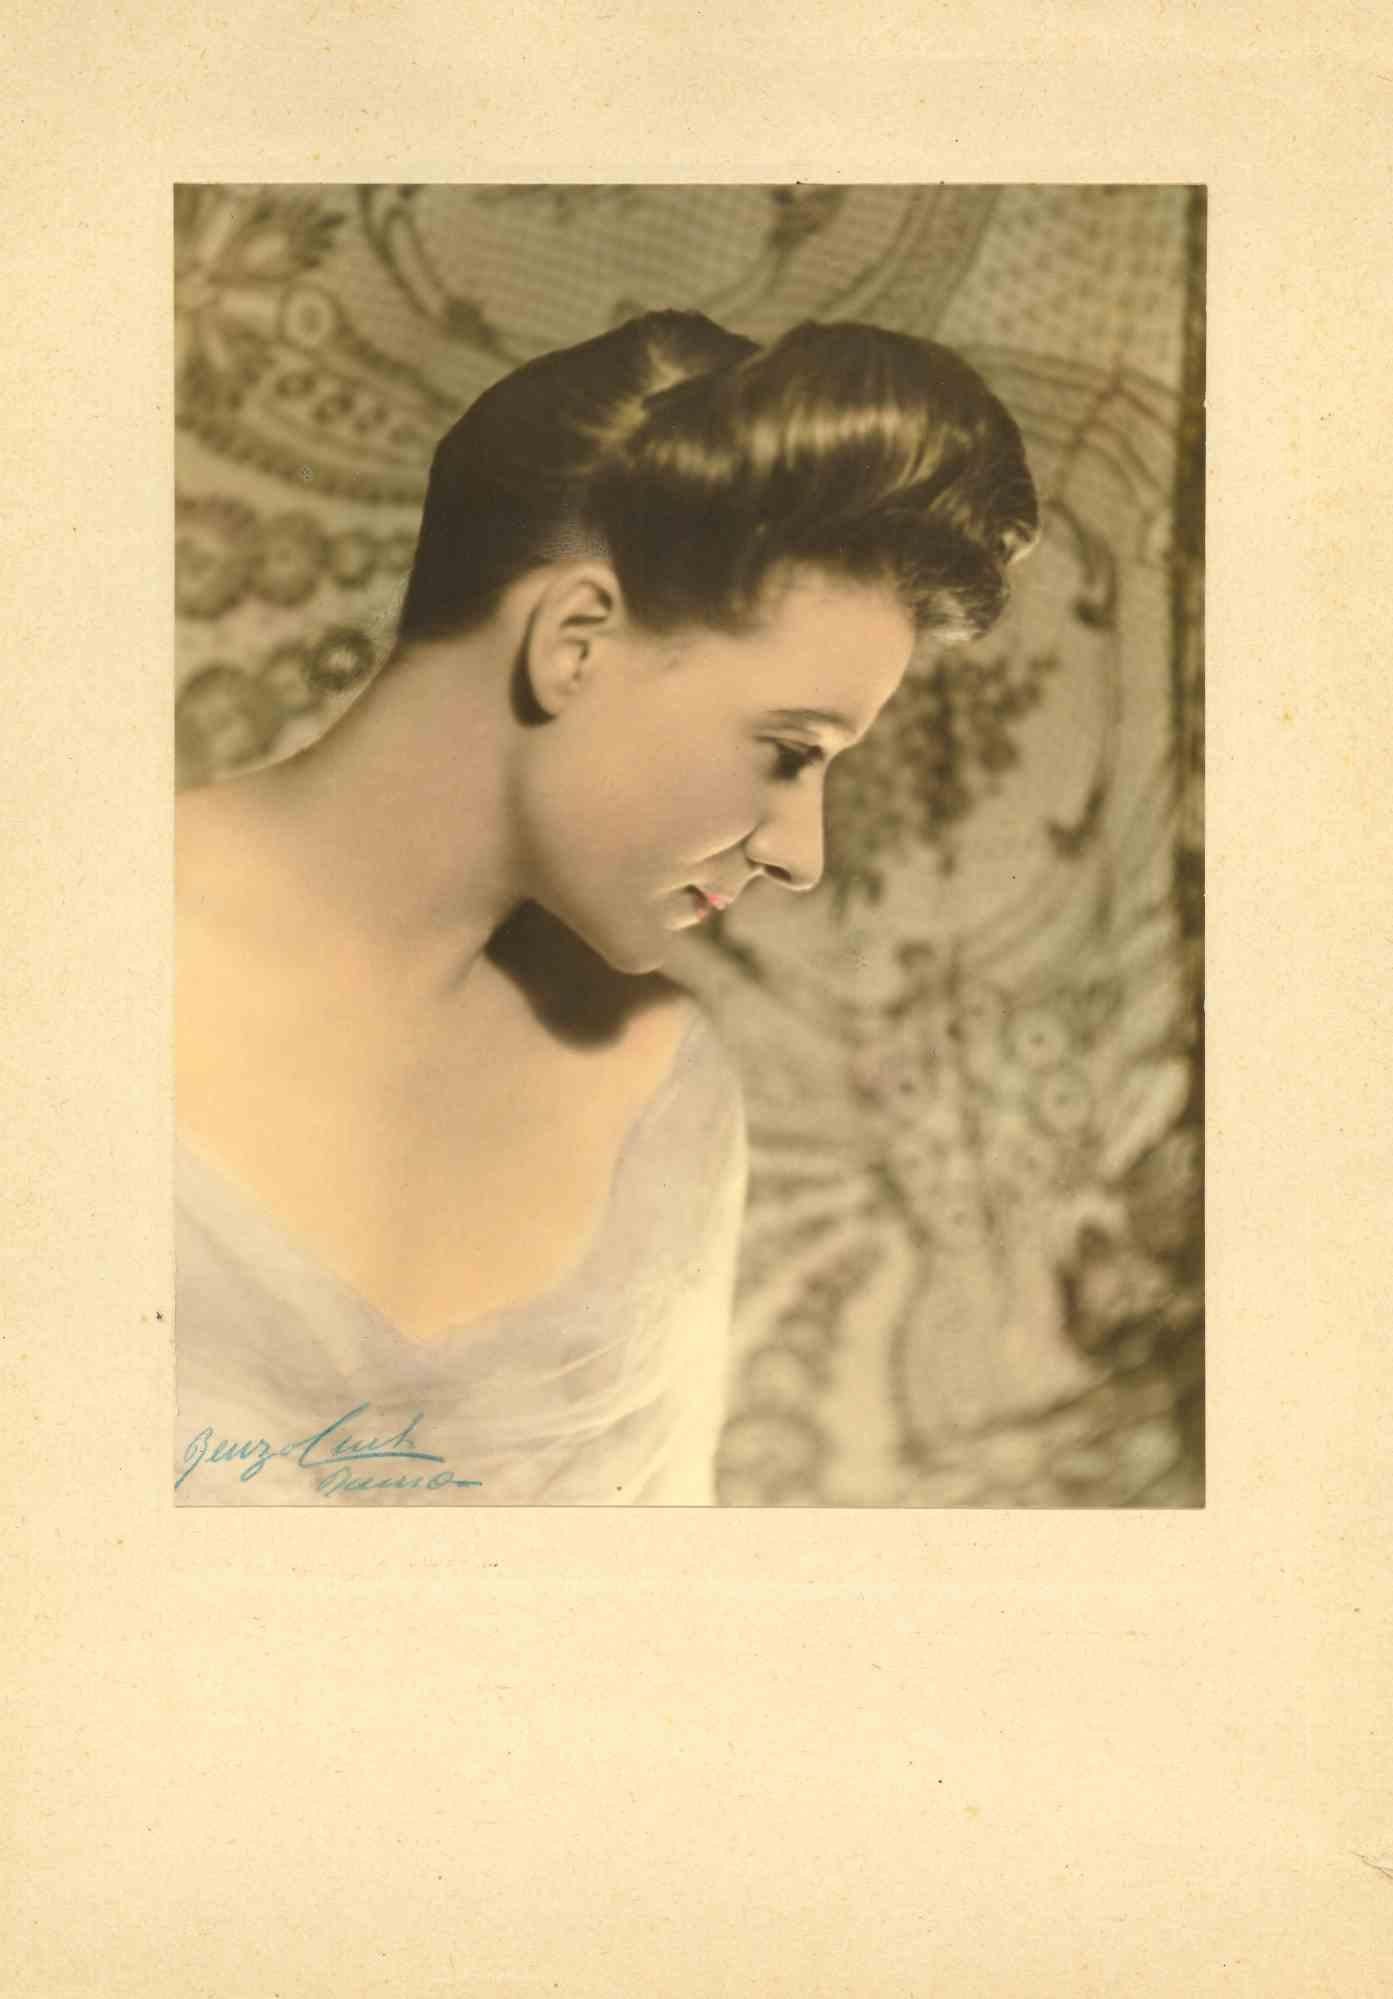 Portrait of Mrs Gilles is a  Photograph realized by Renzo Cinti in 1940s.

